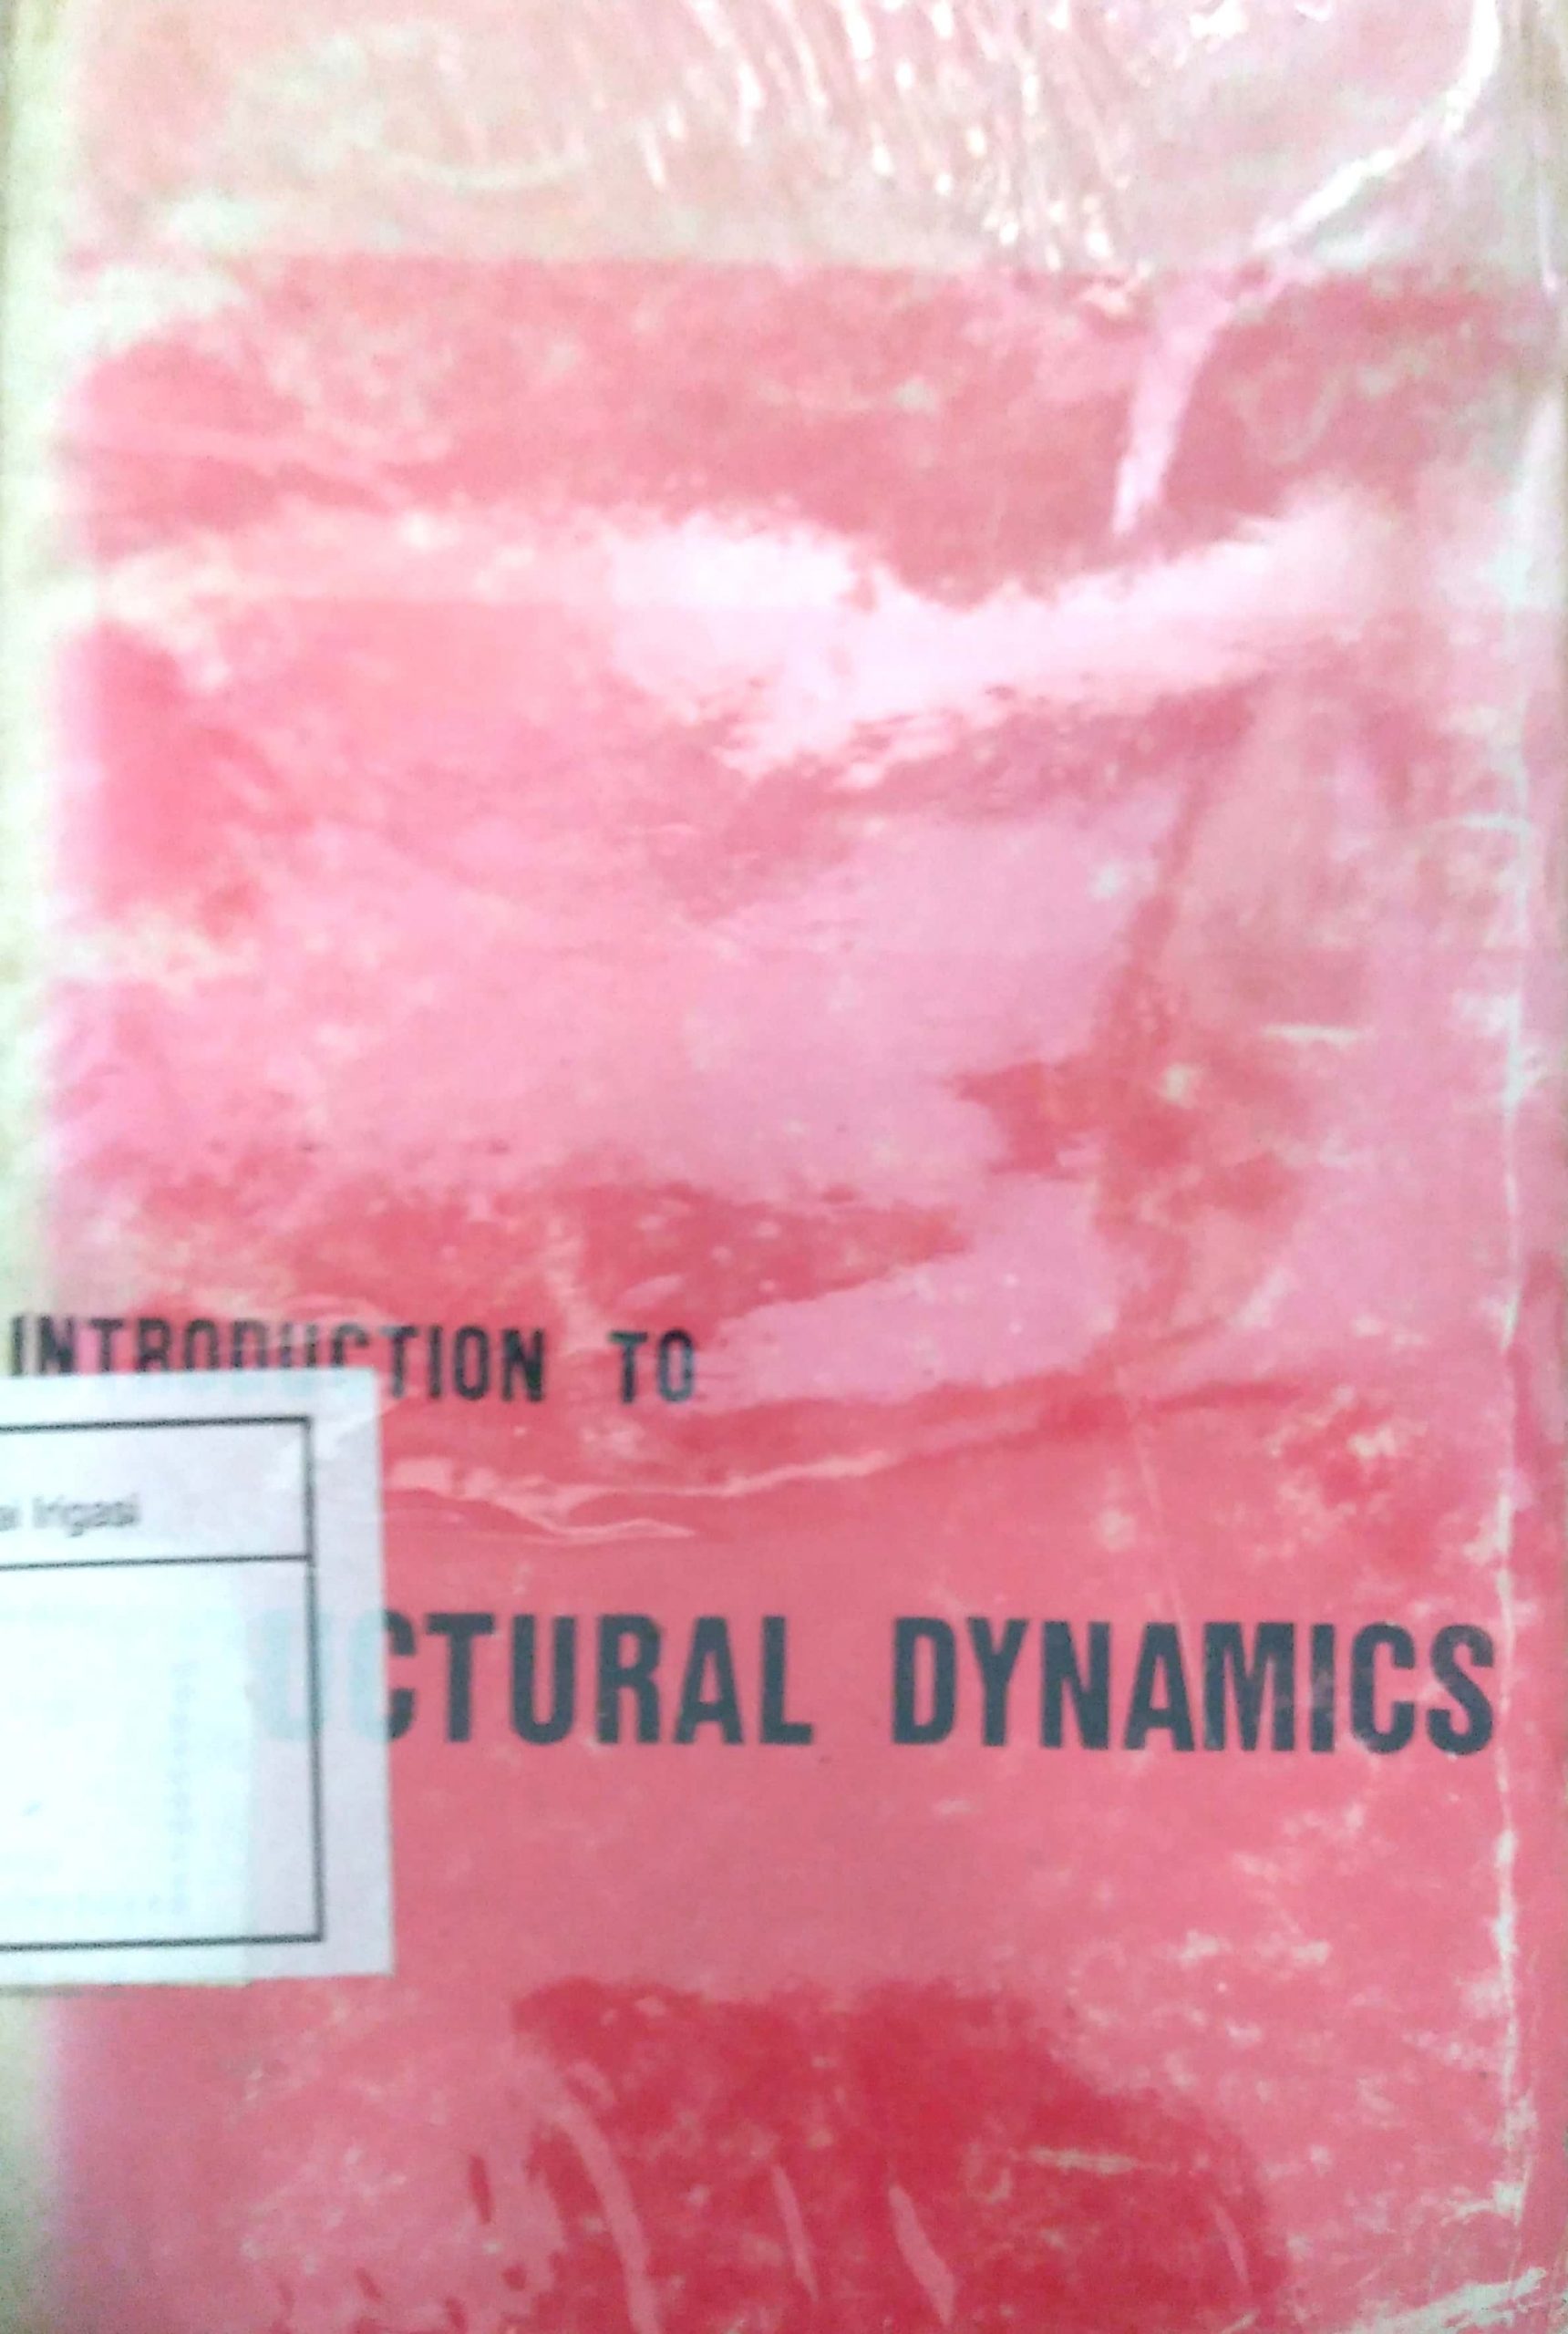 INTRODUCTION TO STRUCTURAL DYNAMICS